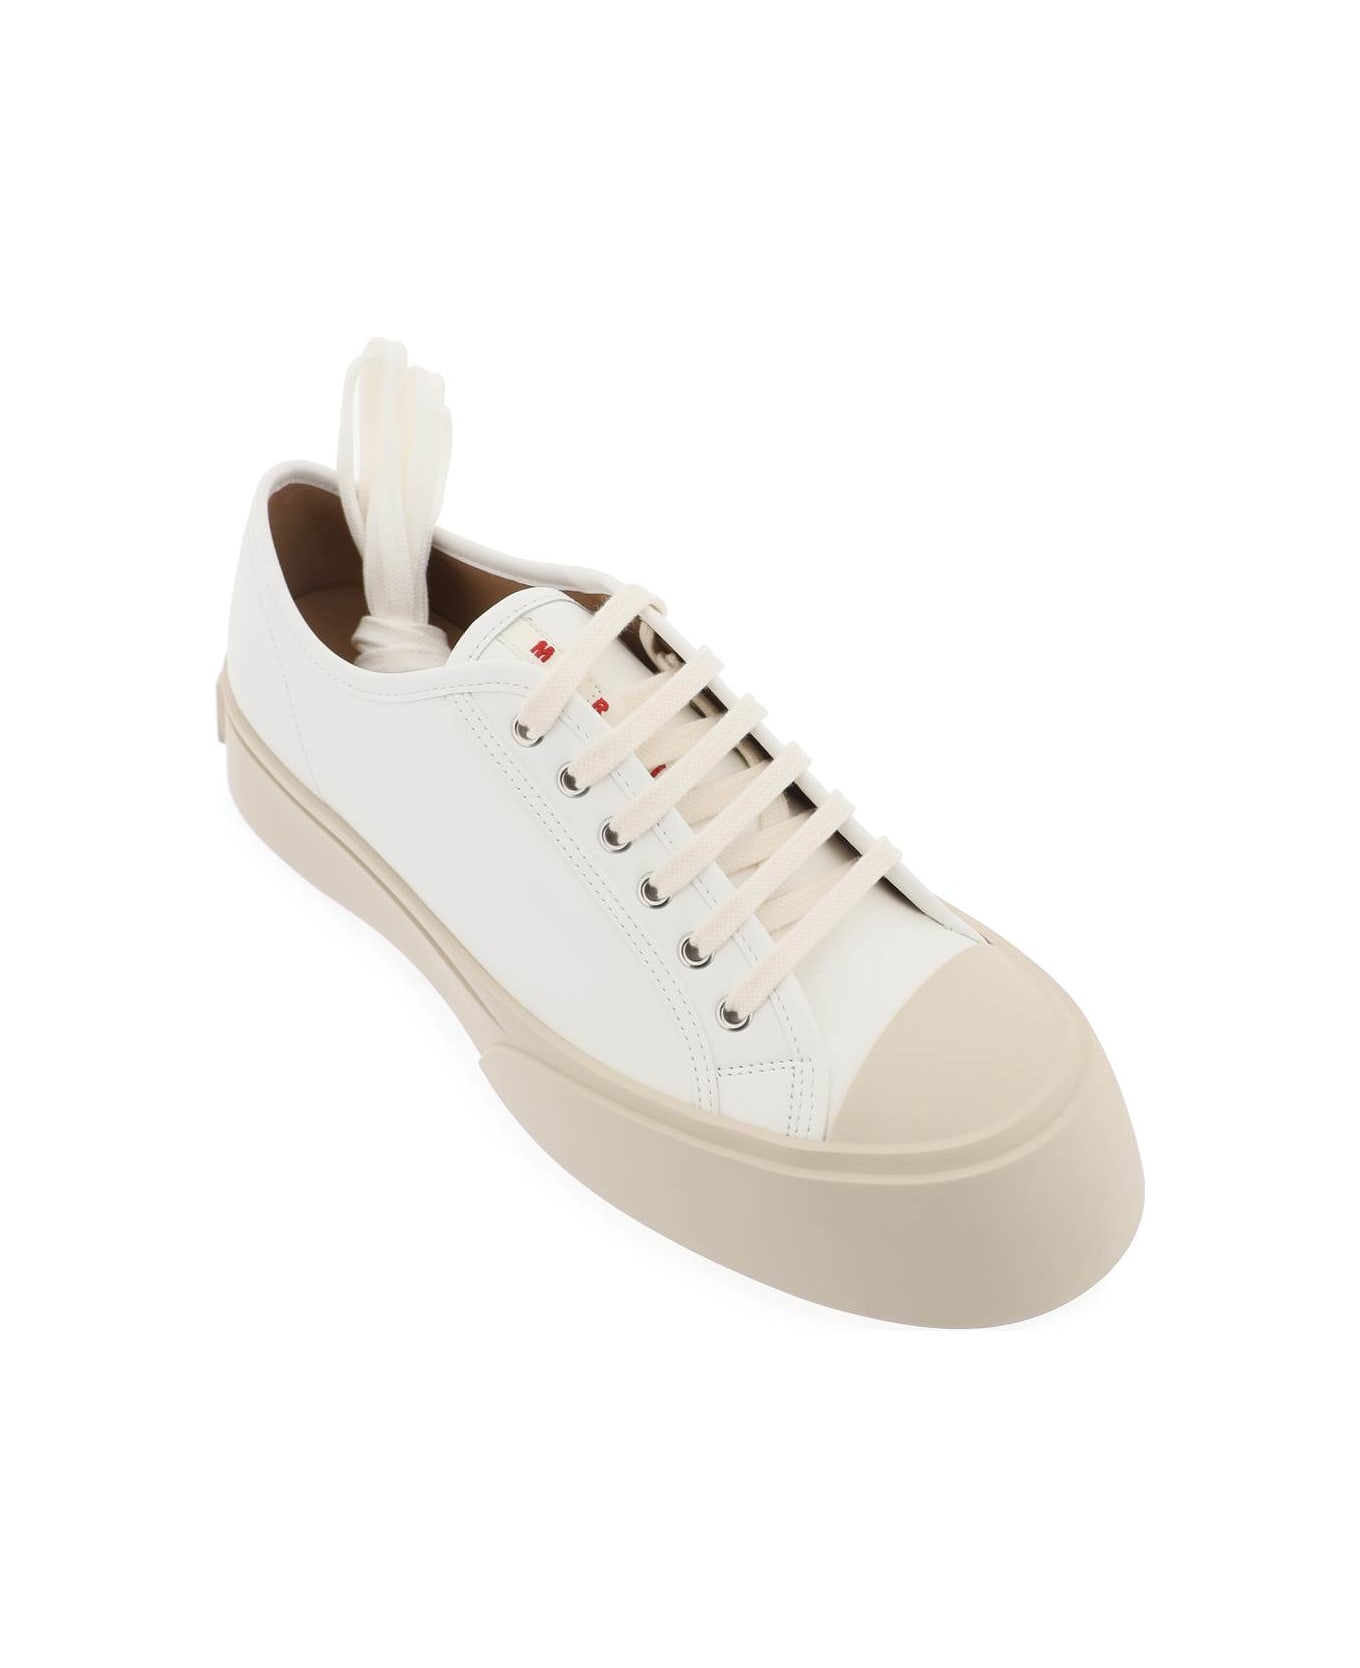 Marni Leather Pablo Sneakers - LILY WHITE (White)